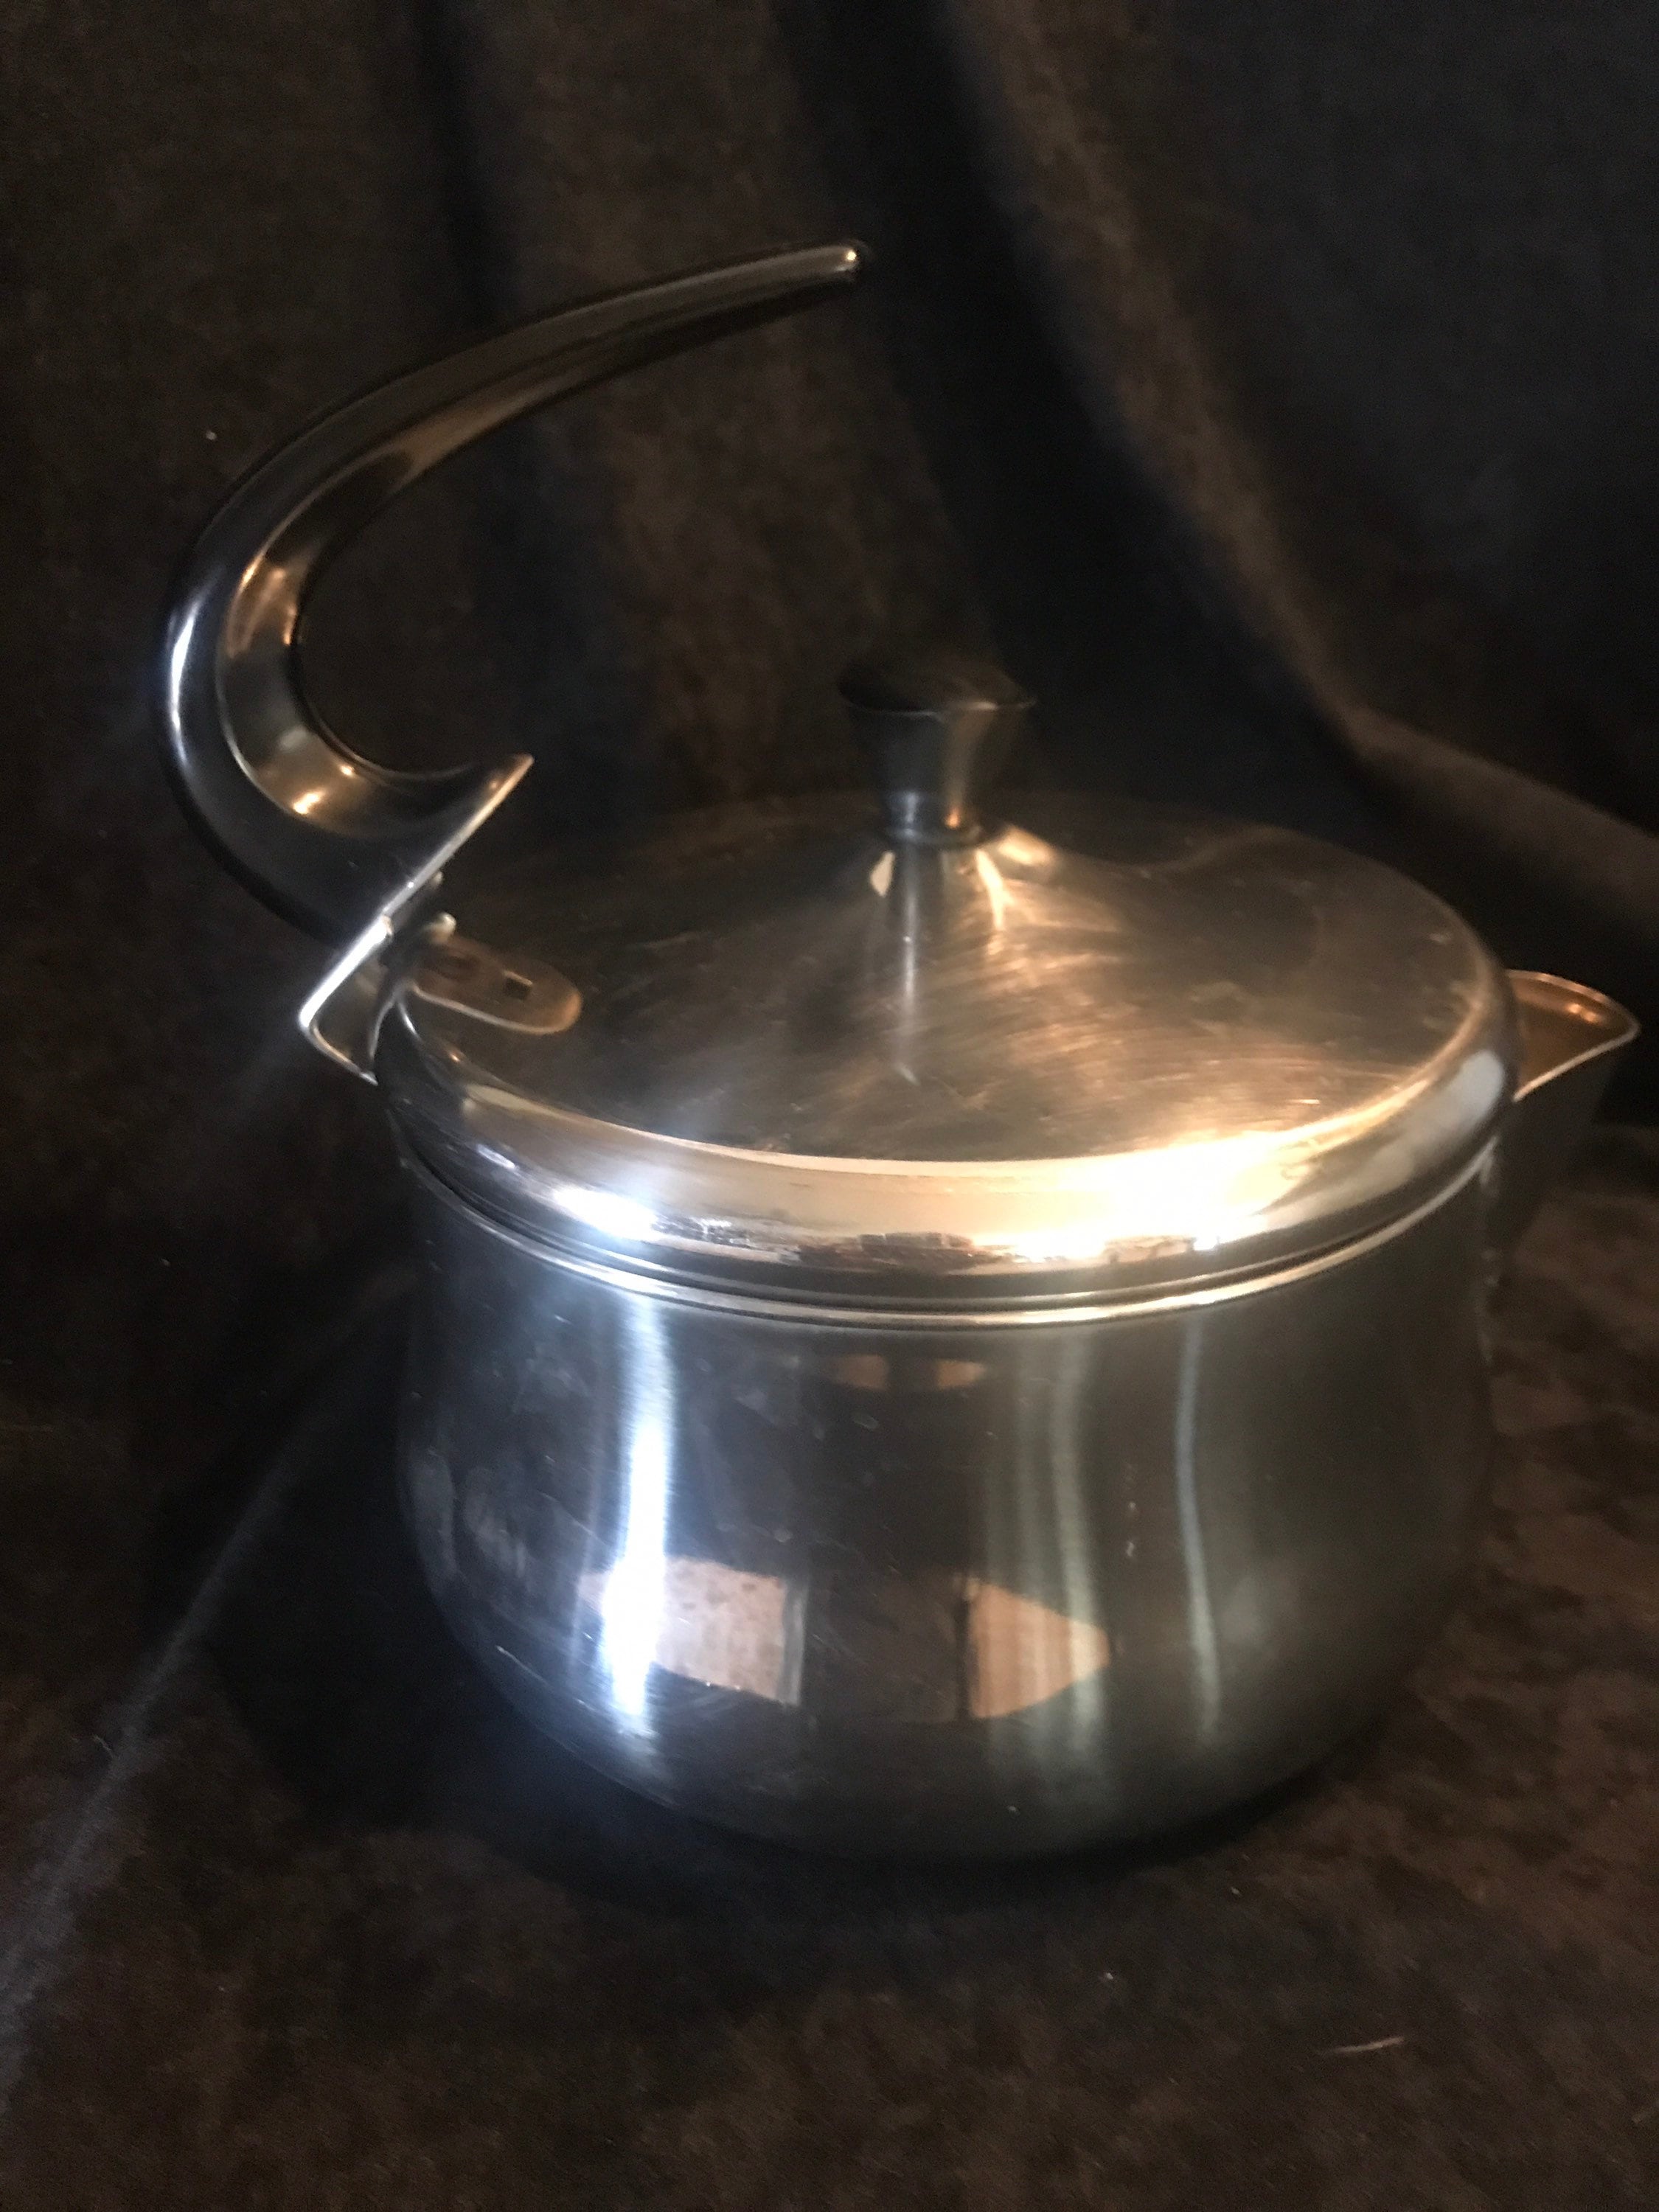 Farberware Stainless Steel 1.7 Liter Electric Tea Kettle, Silver - general  for sale - by owner - craigslist